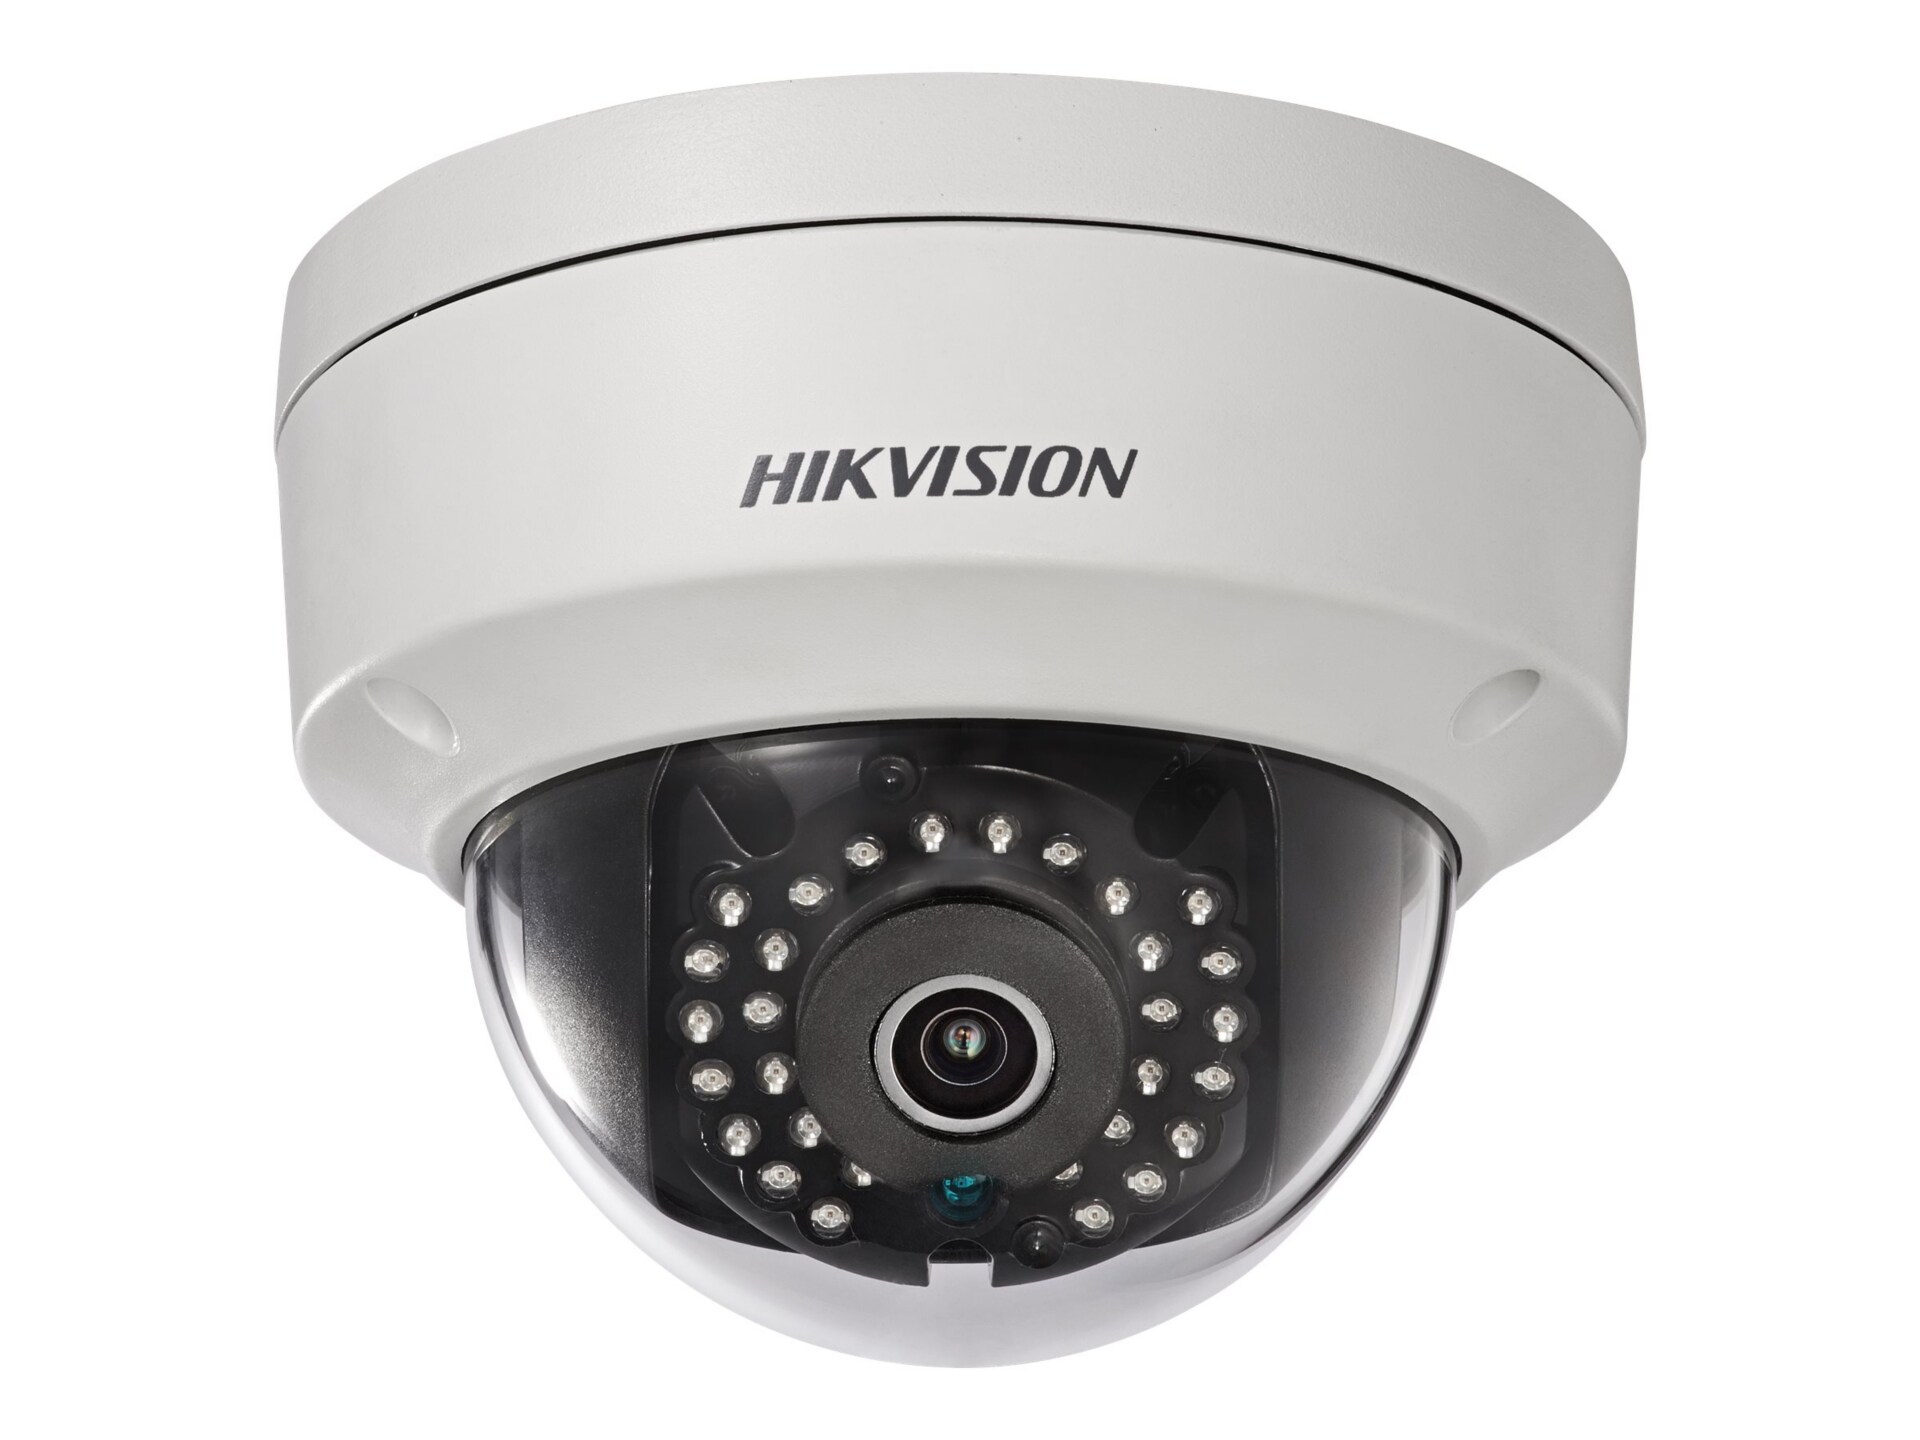 Hikvision EasyIP 2.0 DS-2CD2122FWD-IS - network surveillance camera